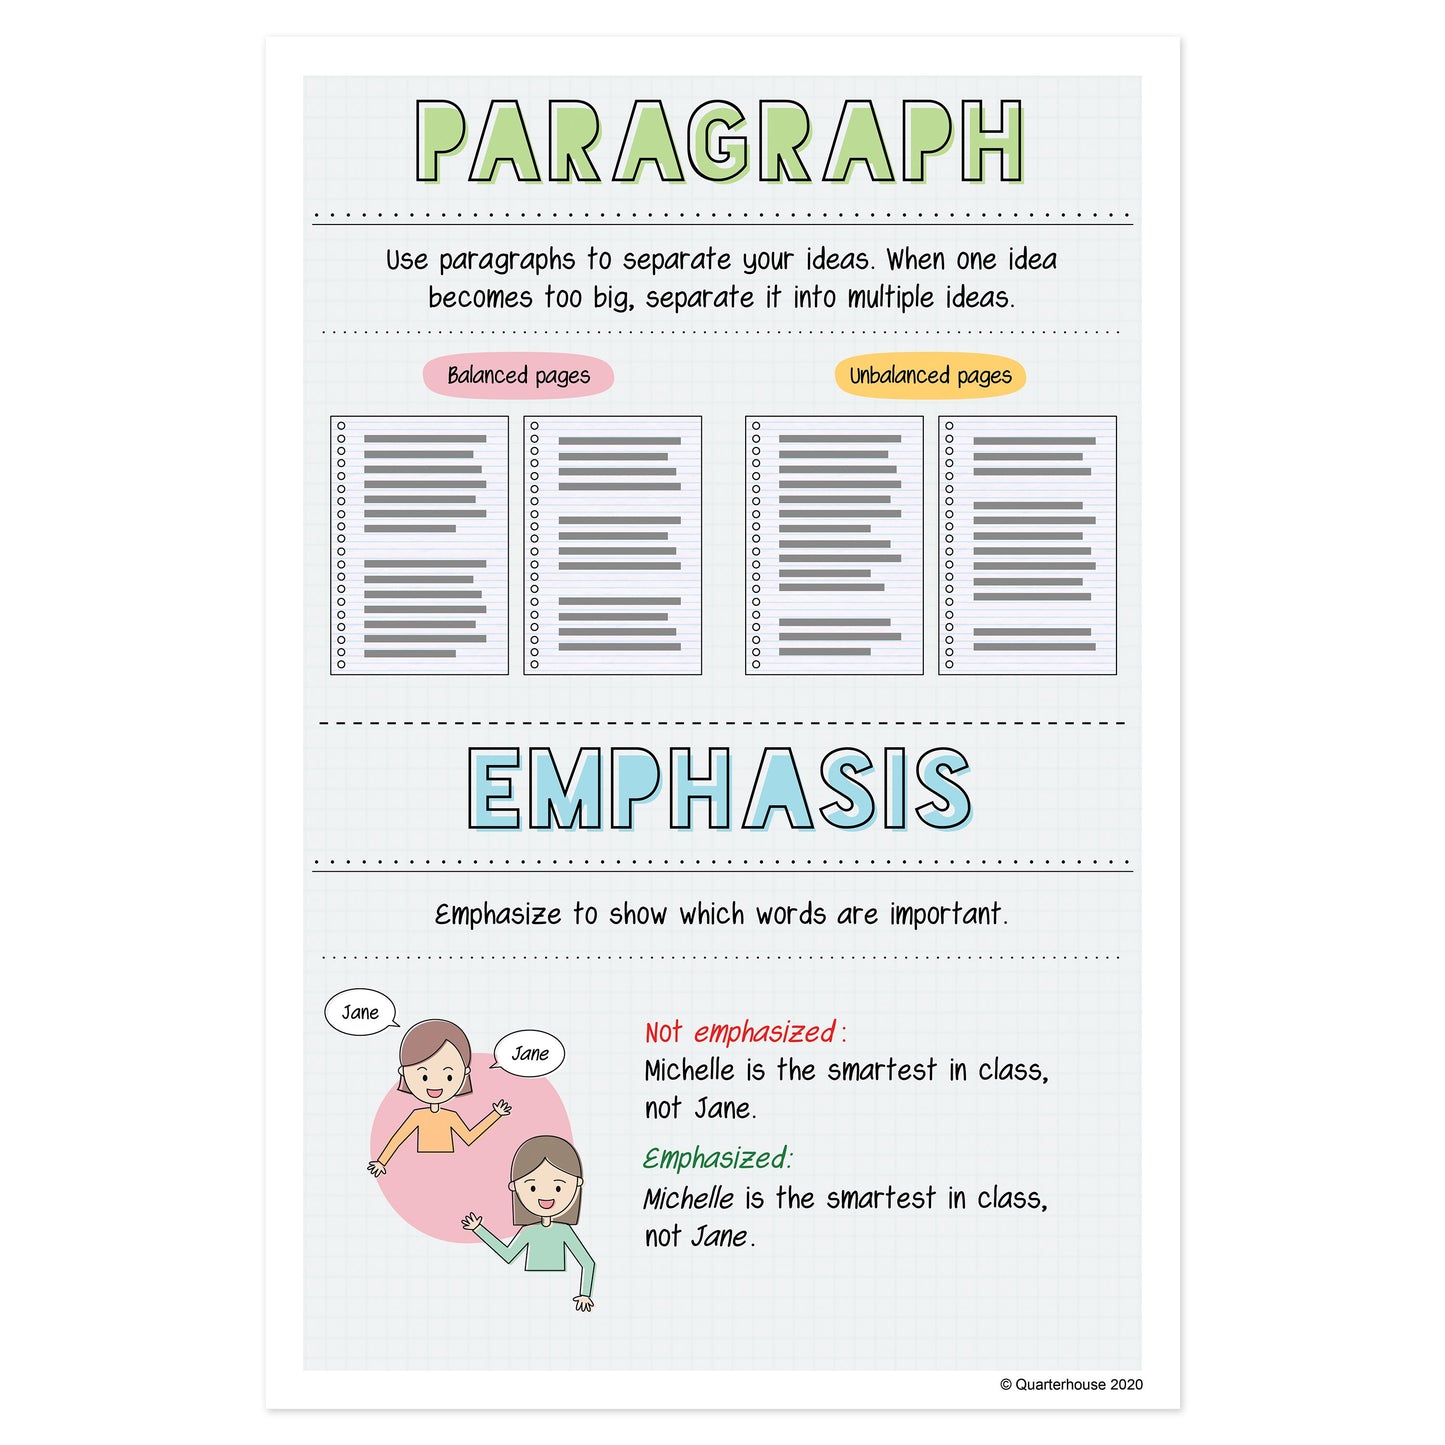 Quarterhouse Paragraphs and Emphasis in Writing Poster, English-Language Arts Classroom Materials for Teachers